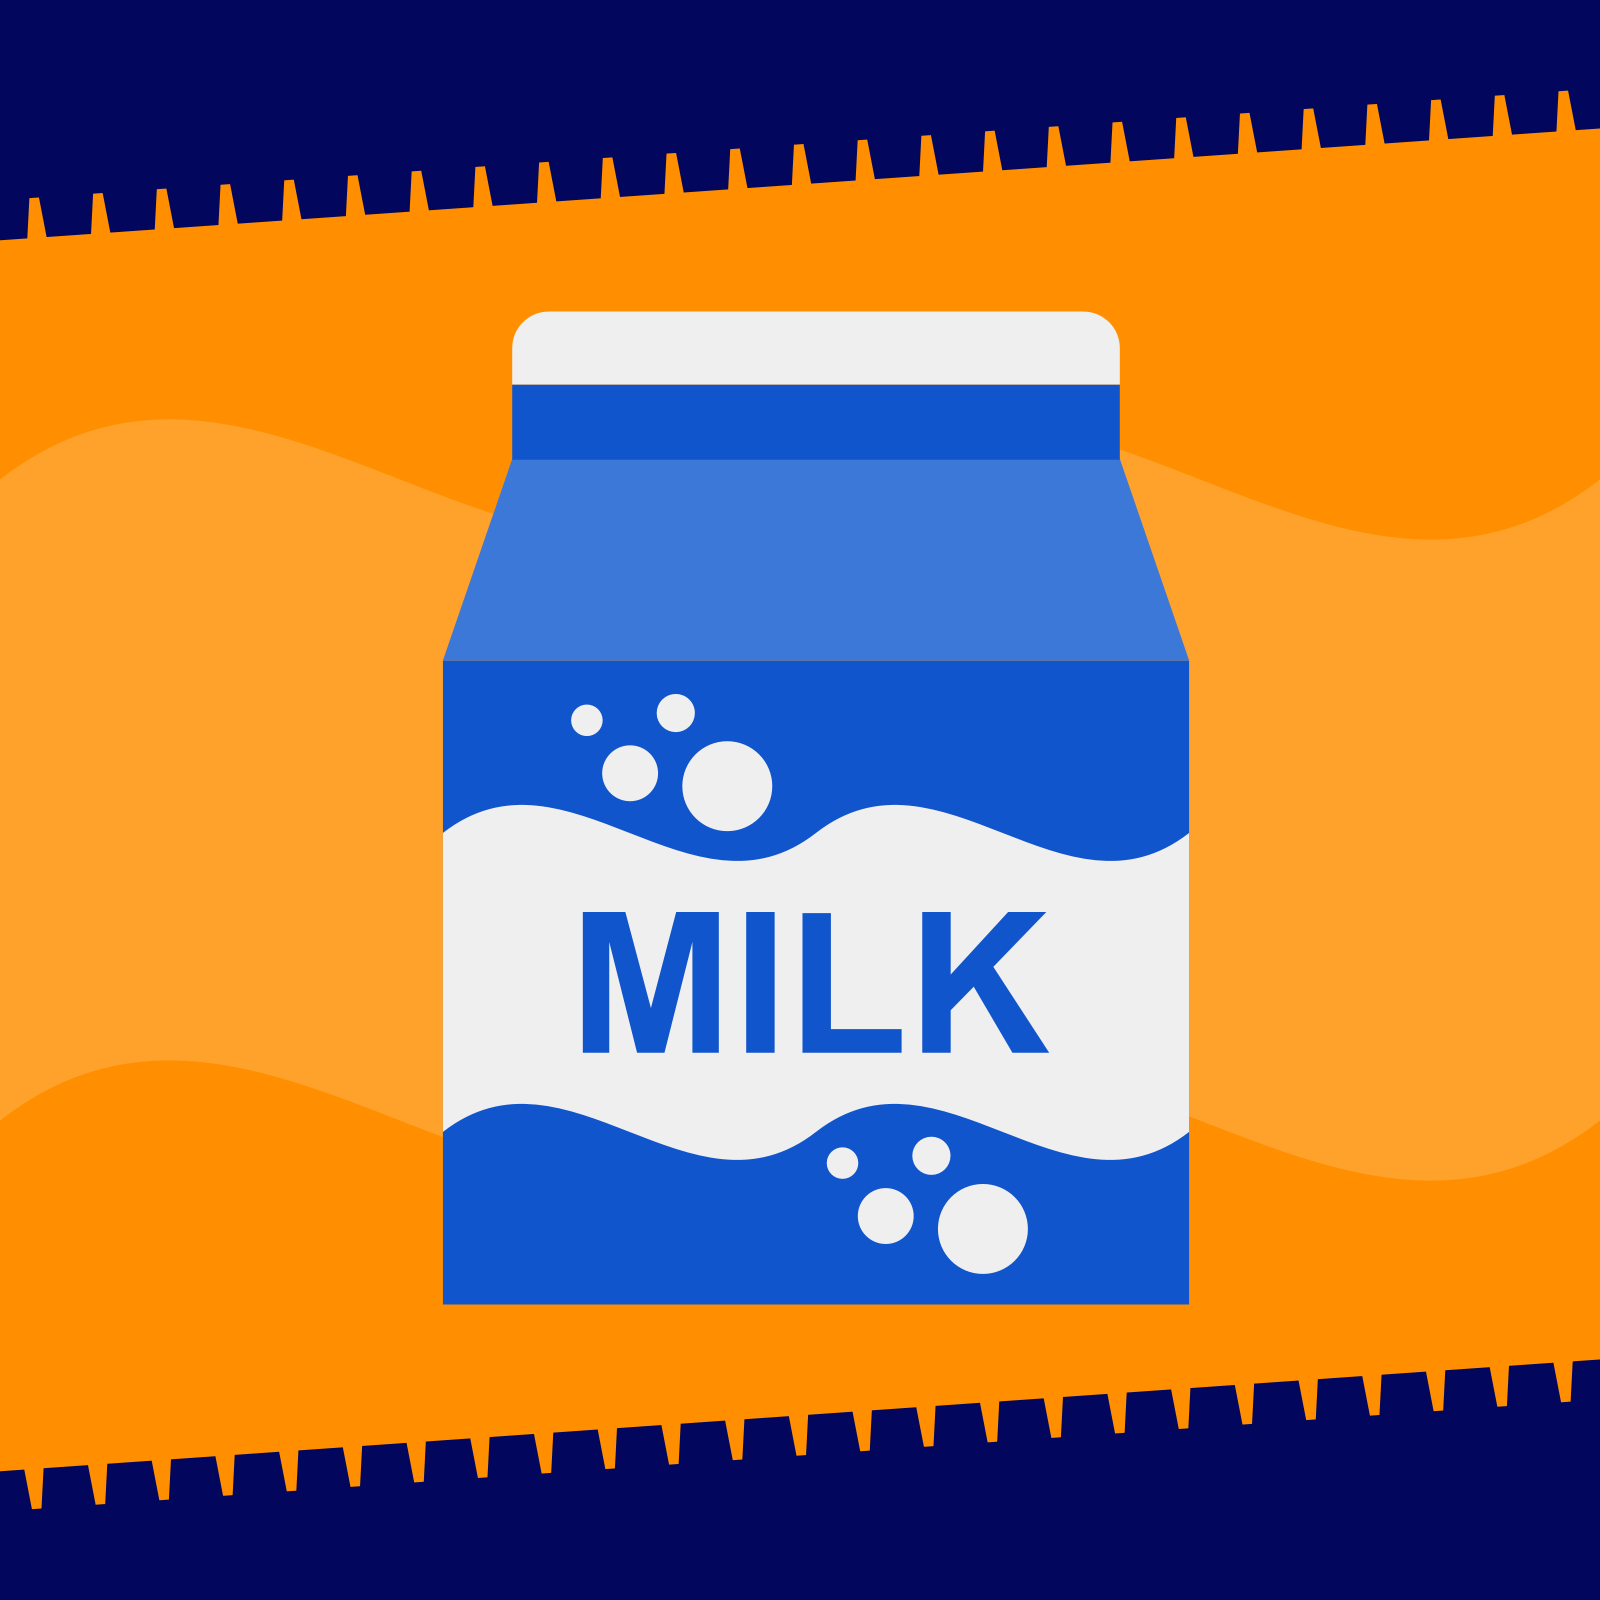 Drawing of a blue and white milk carton